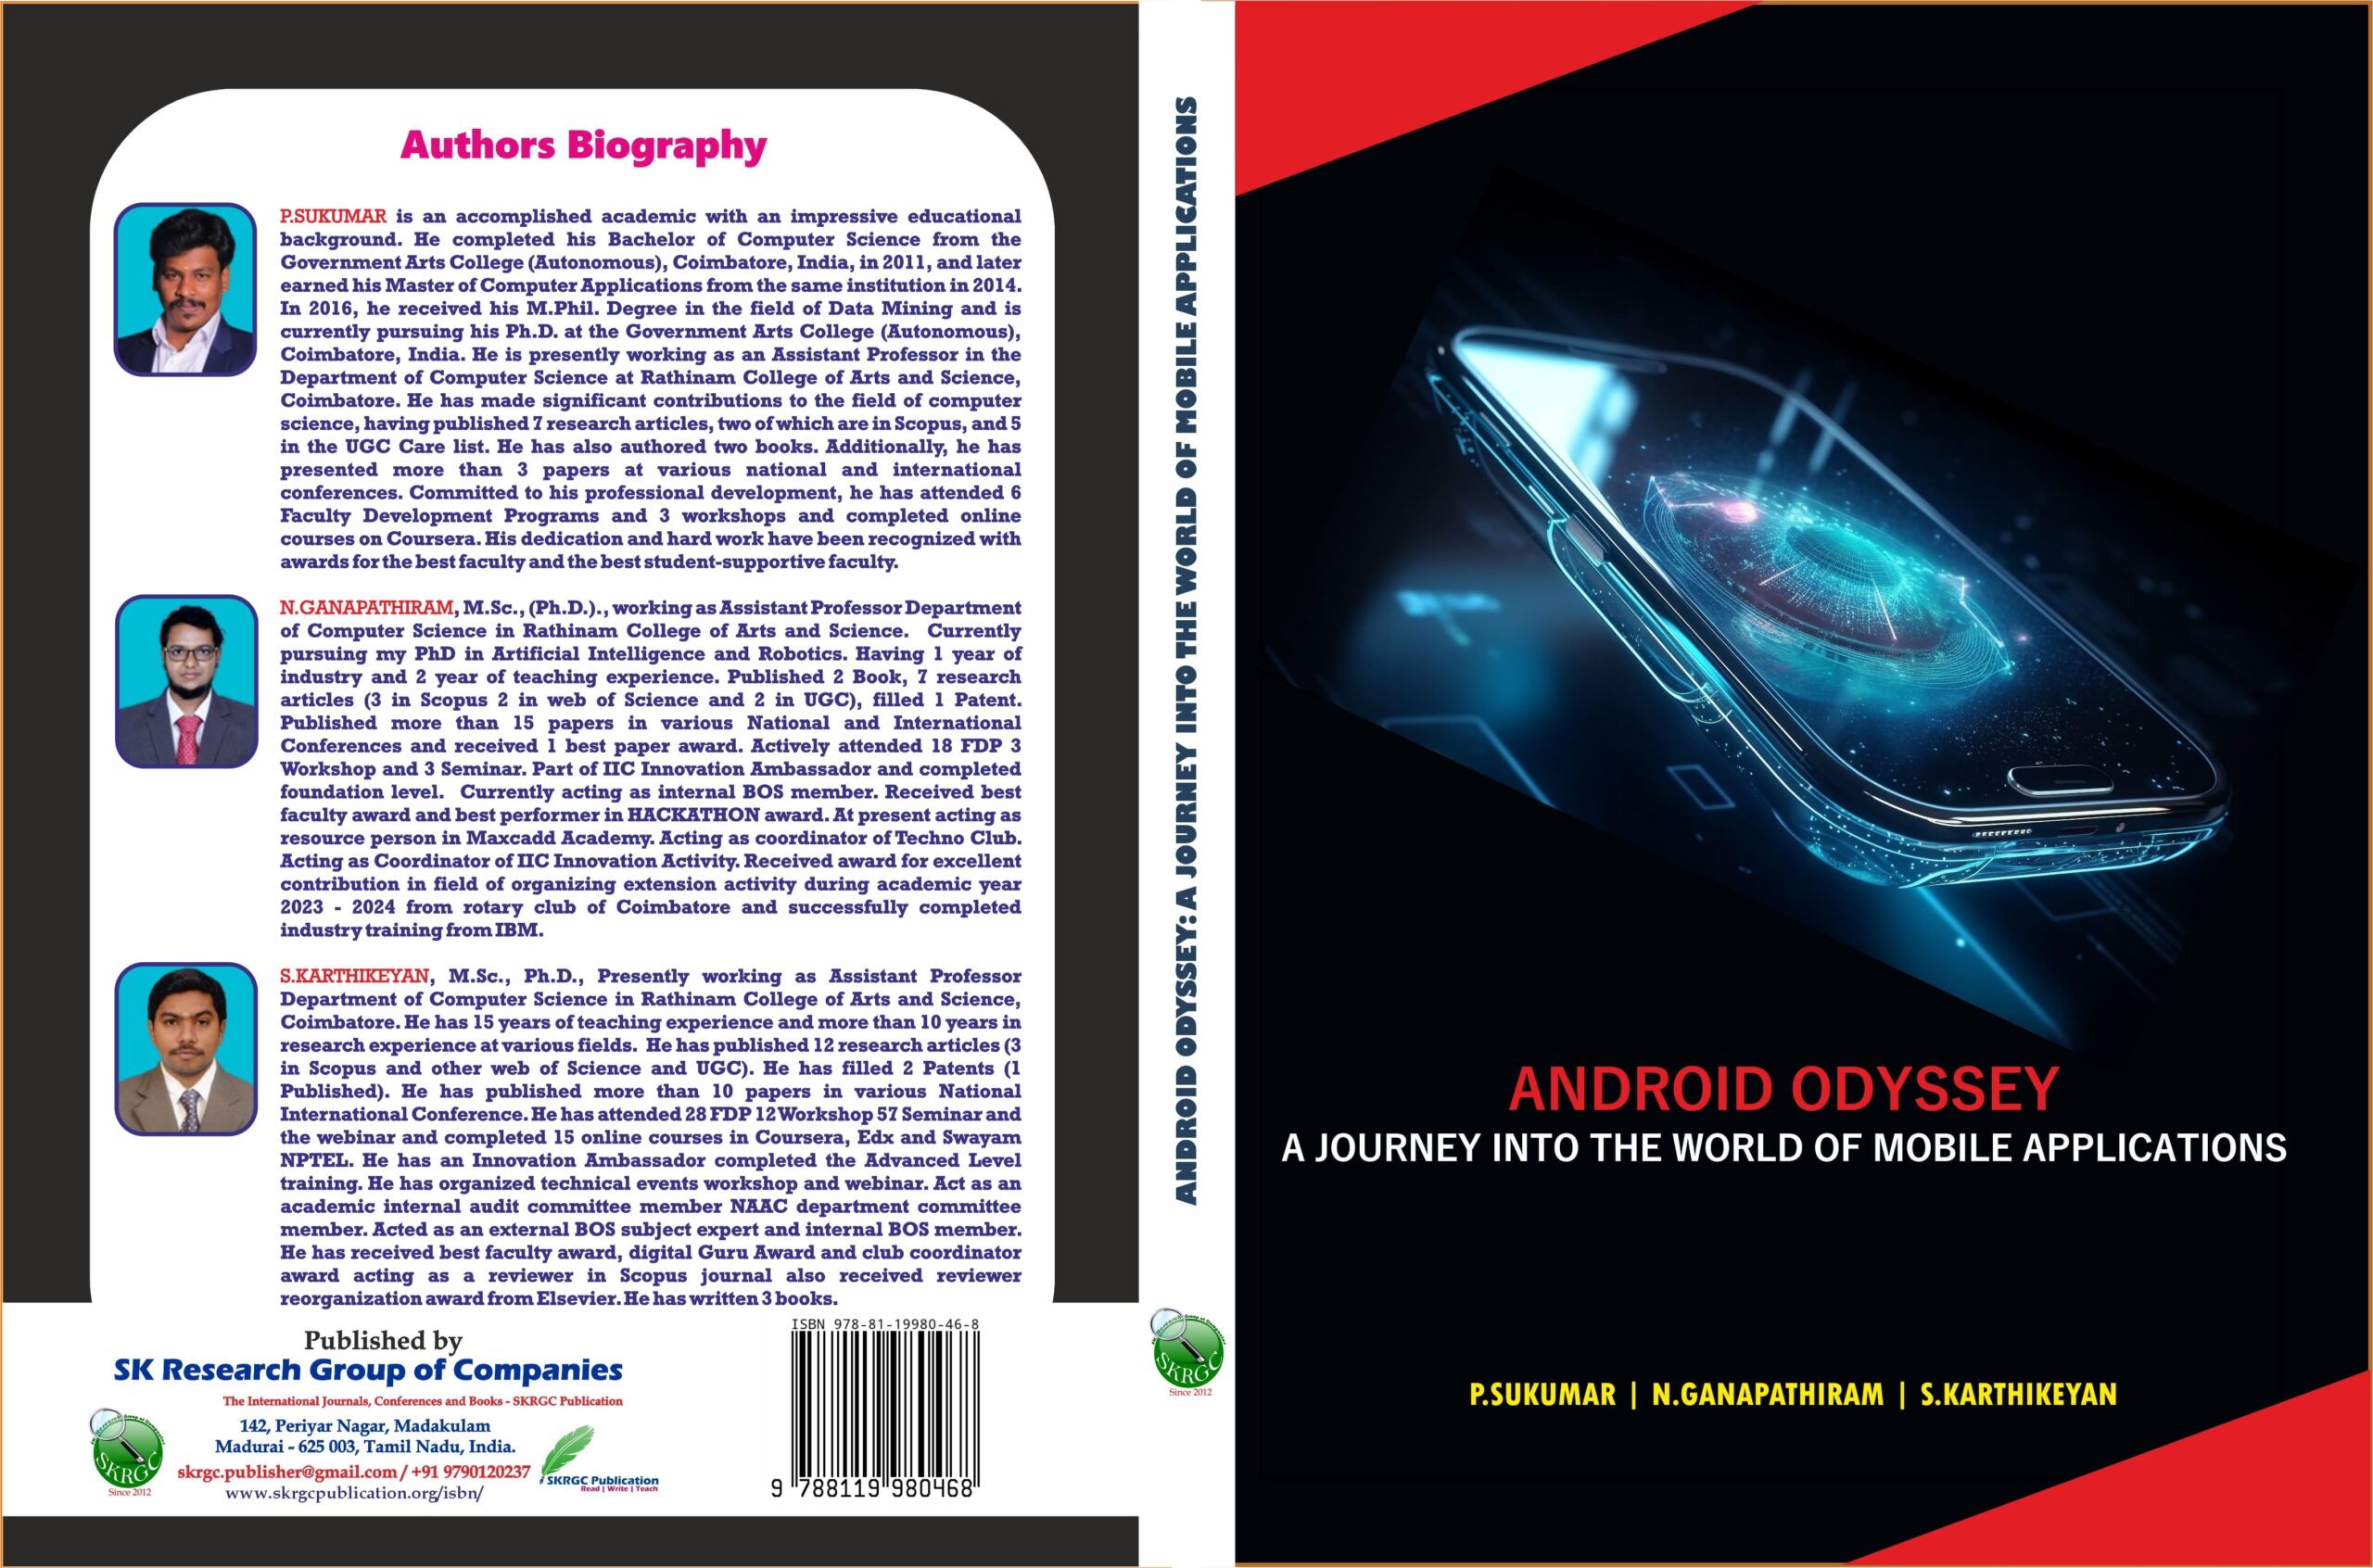 Android Odyssey: A Journey into the World of Mobile Applications